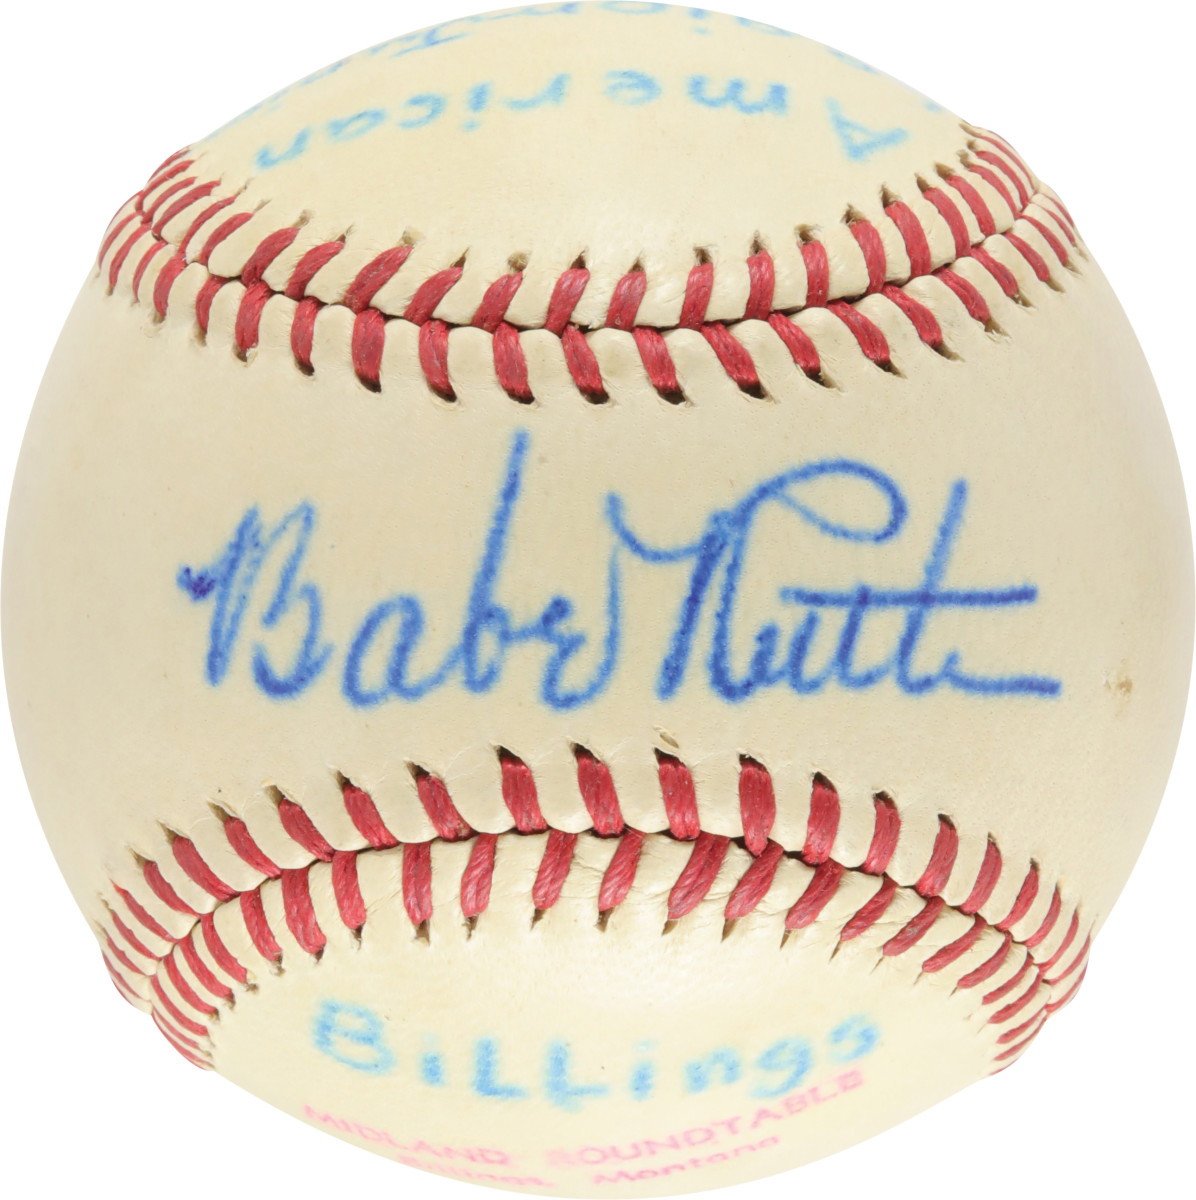 Babe Ruth Memorabilia for Sale at Online Auction